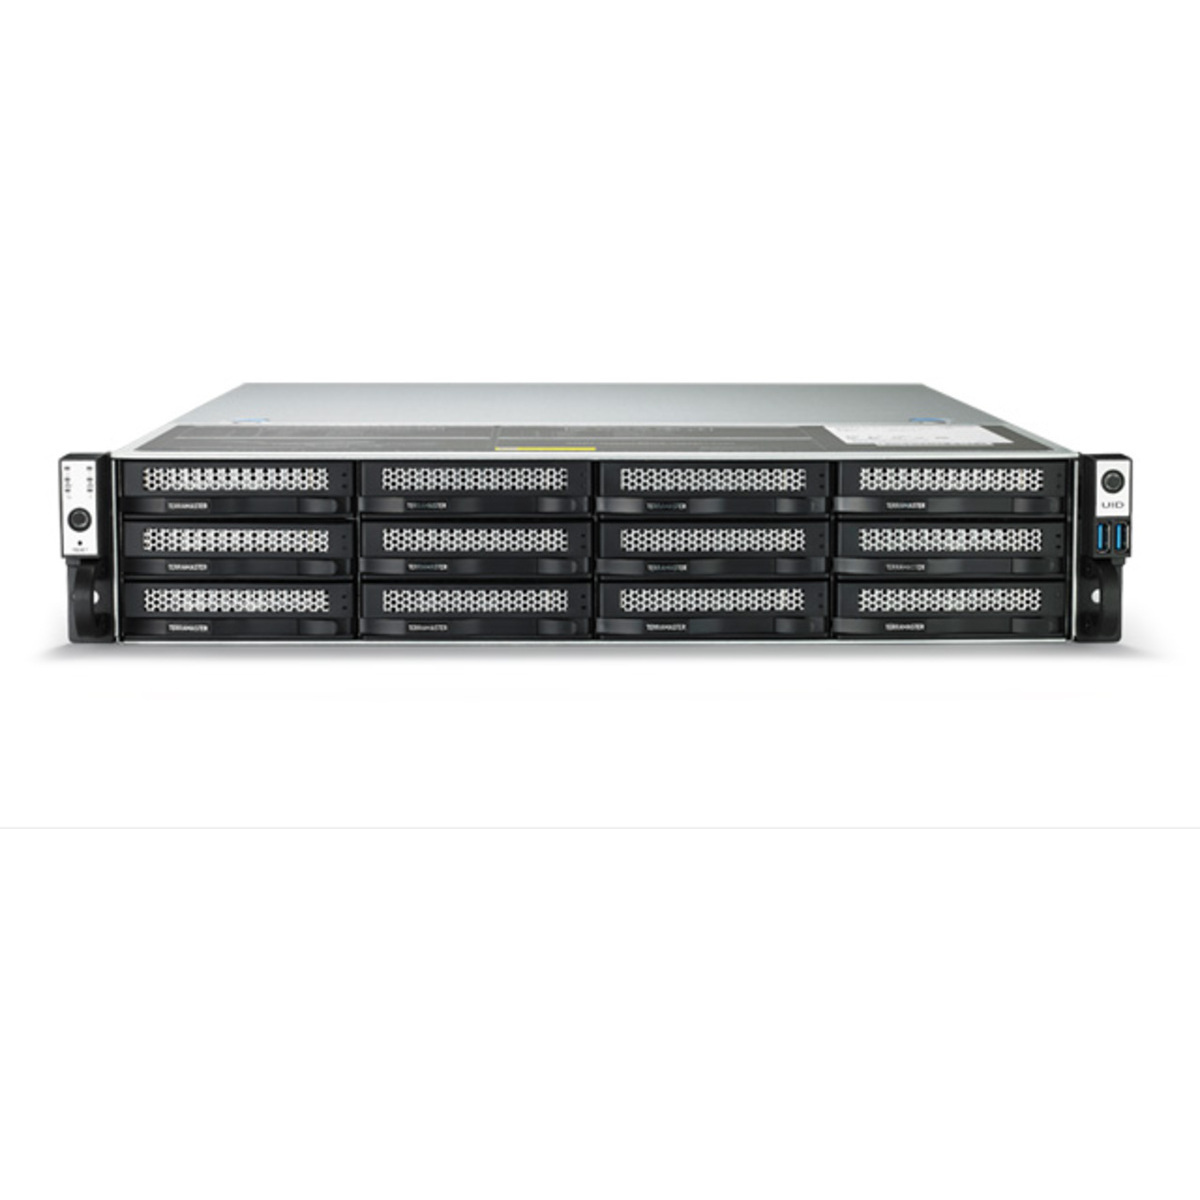 TerraMaster U12-722-2224 216tb 12-Bay RackMount Large Business / Enterprise NAS - Network Attached Storage Device 9x24tb Western Digital Red Pro WD240KFGX 3.5 7200rpm SATA 6Gb/s HDD NAS Class Drives Installed - Burn-In Tested U12-722-2224